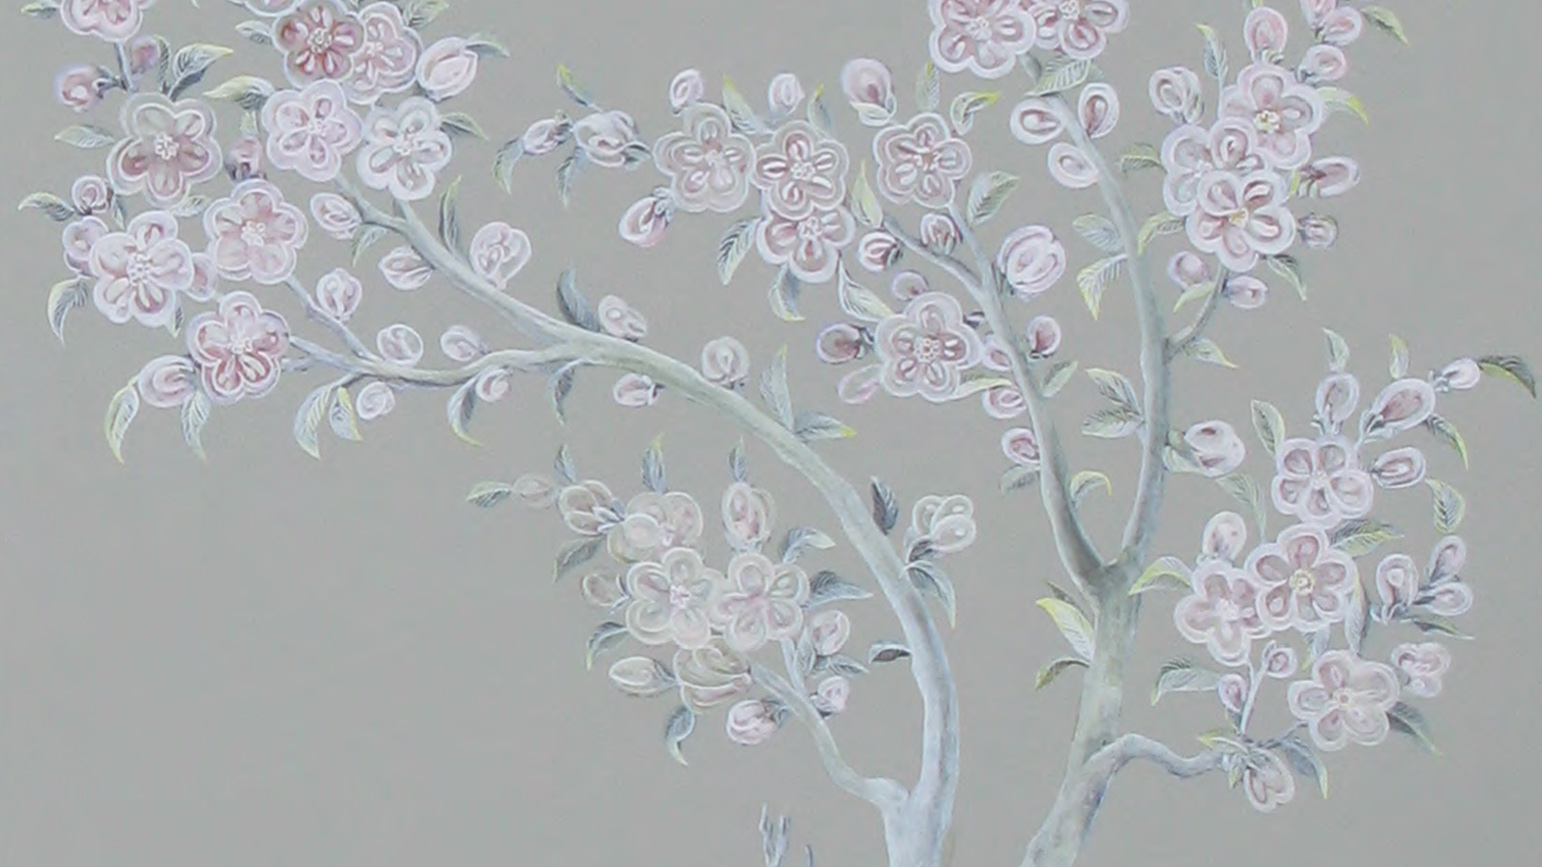 Painting of flowers against a gray background